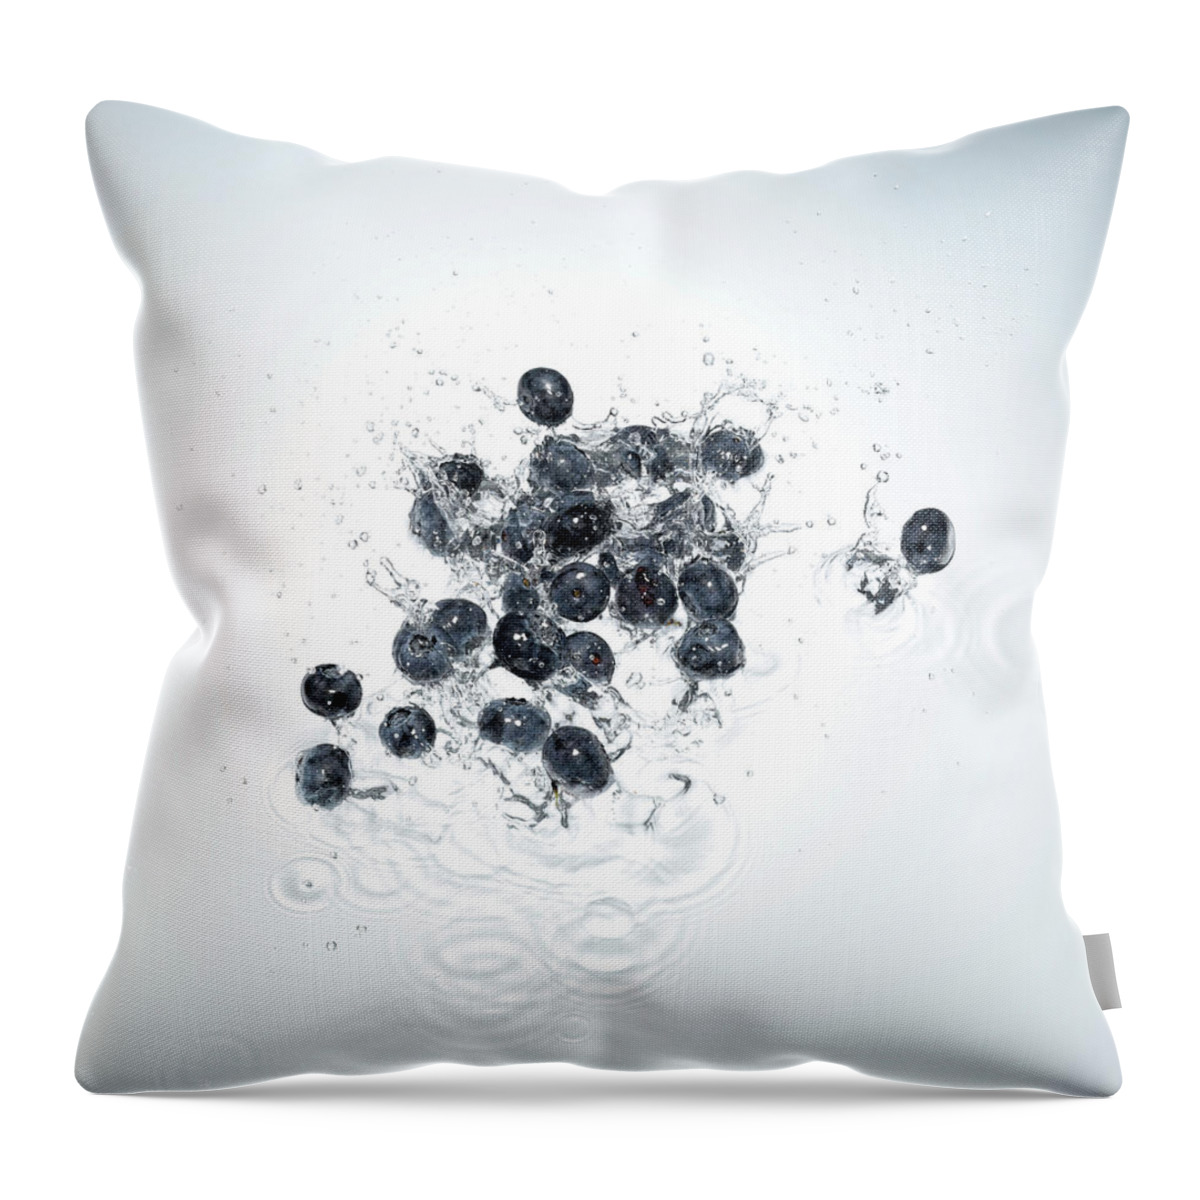 White Background Throw Pillow featuring the photograph Blueberries Splashing In To Water by Chris Stein